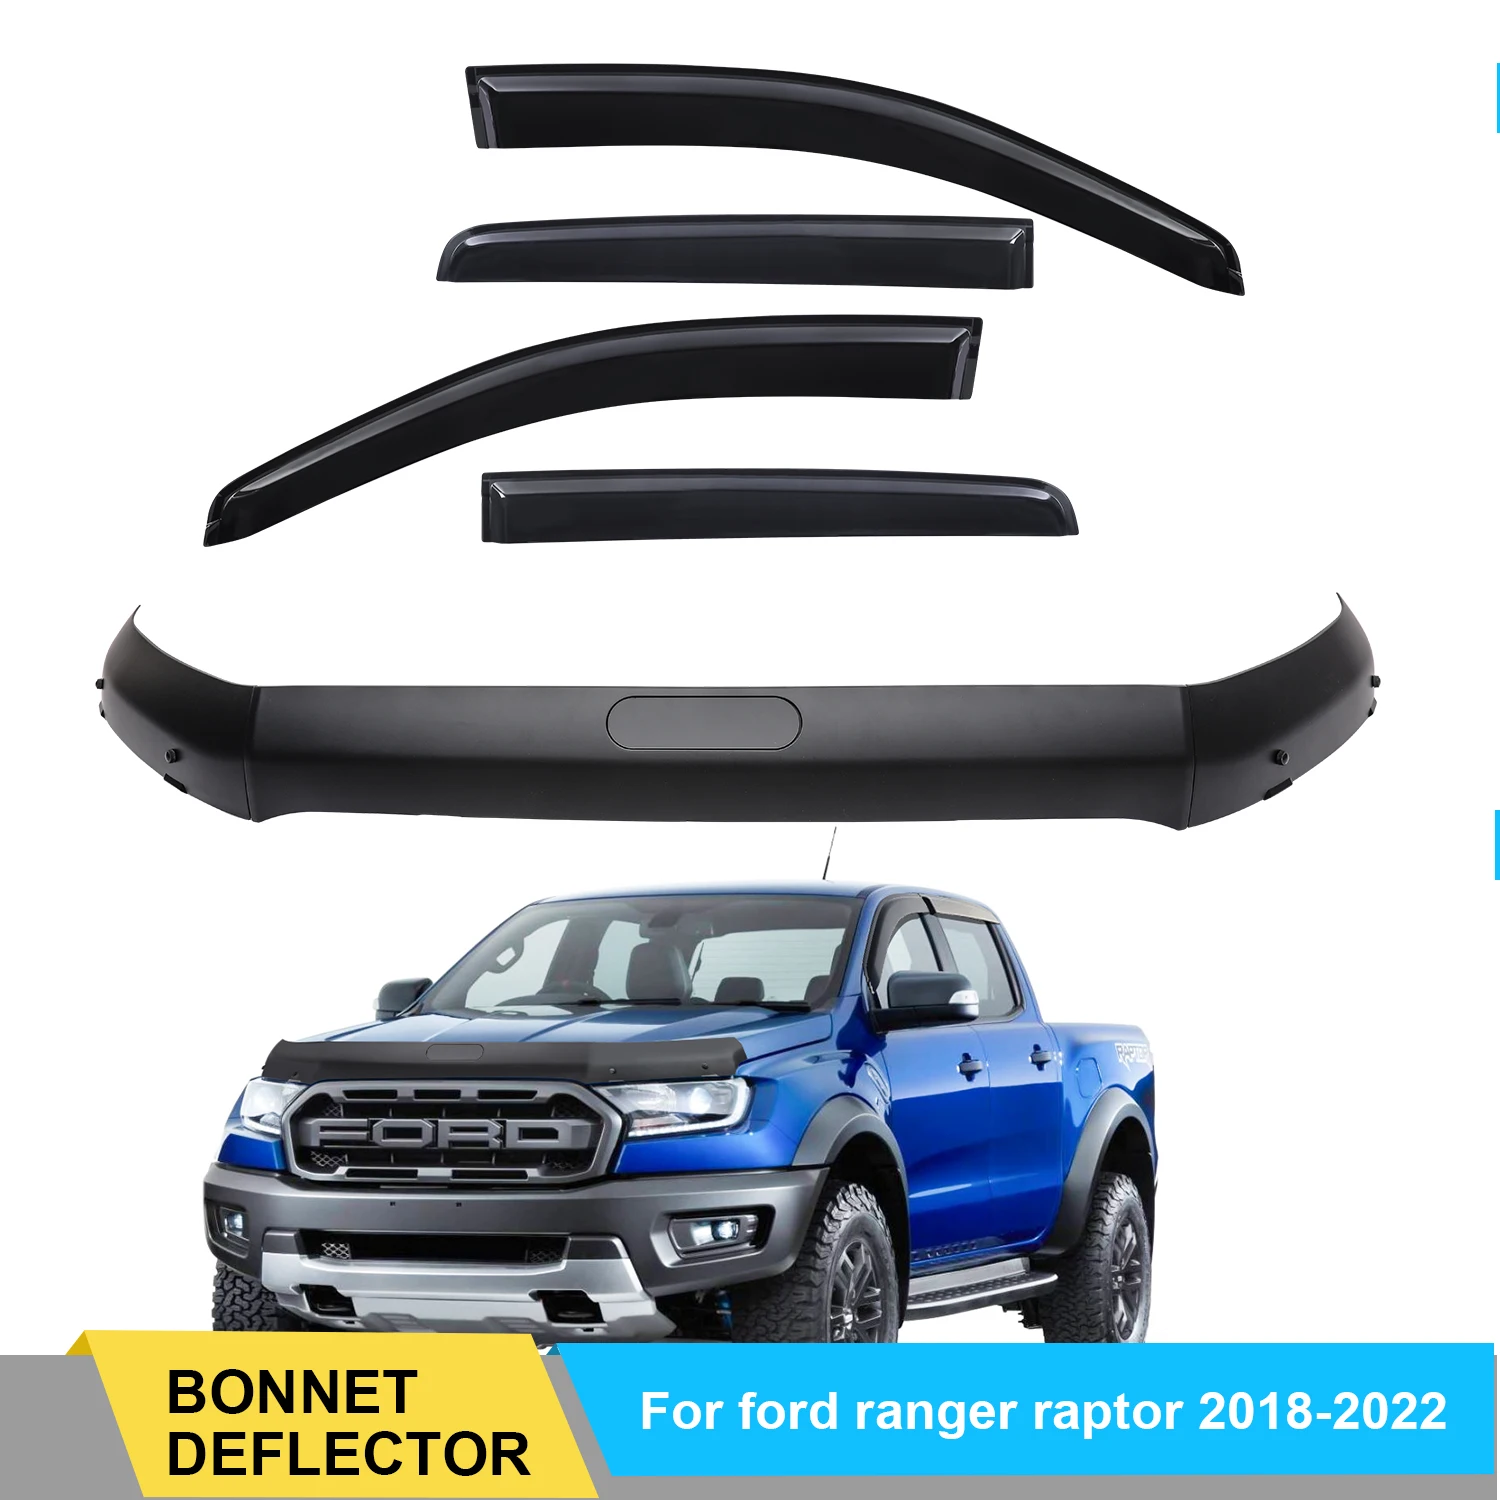 

Bonnet Protector Guard + Weather Shields Weather Shield To Suit For Ford Ranger Raptor 2015 2016 2017 2018 2019 2020 2021 2022